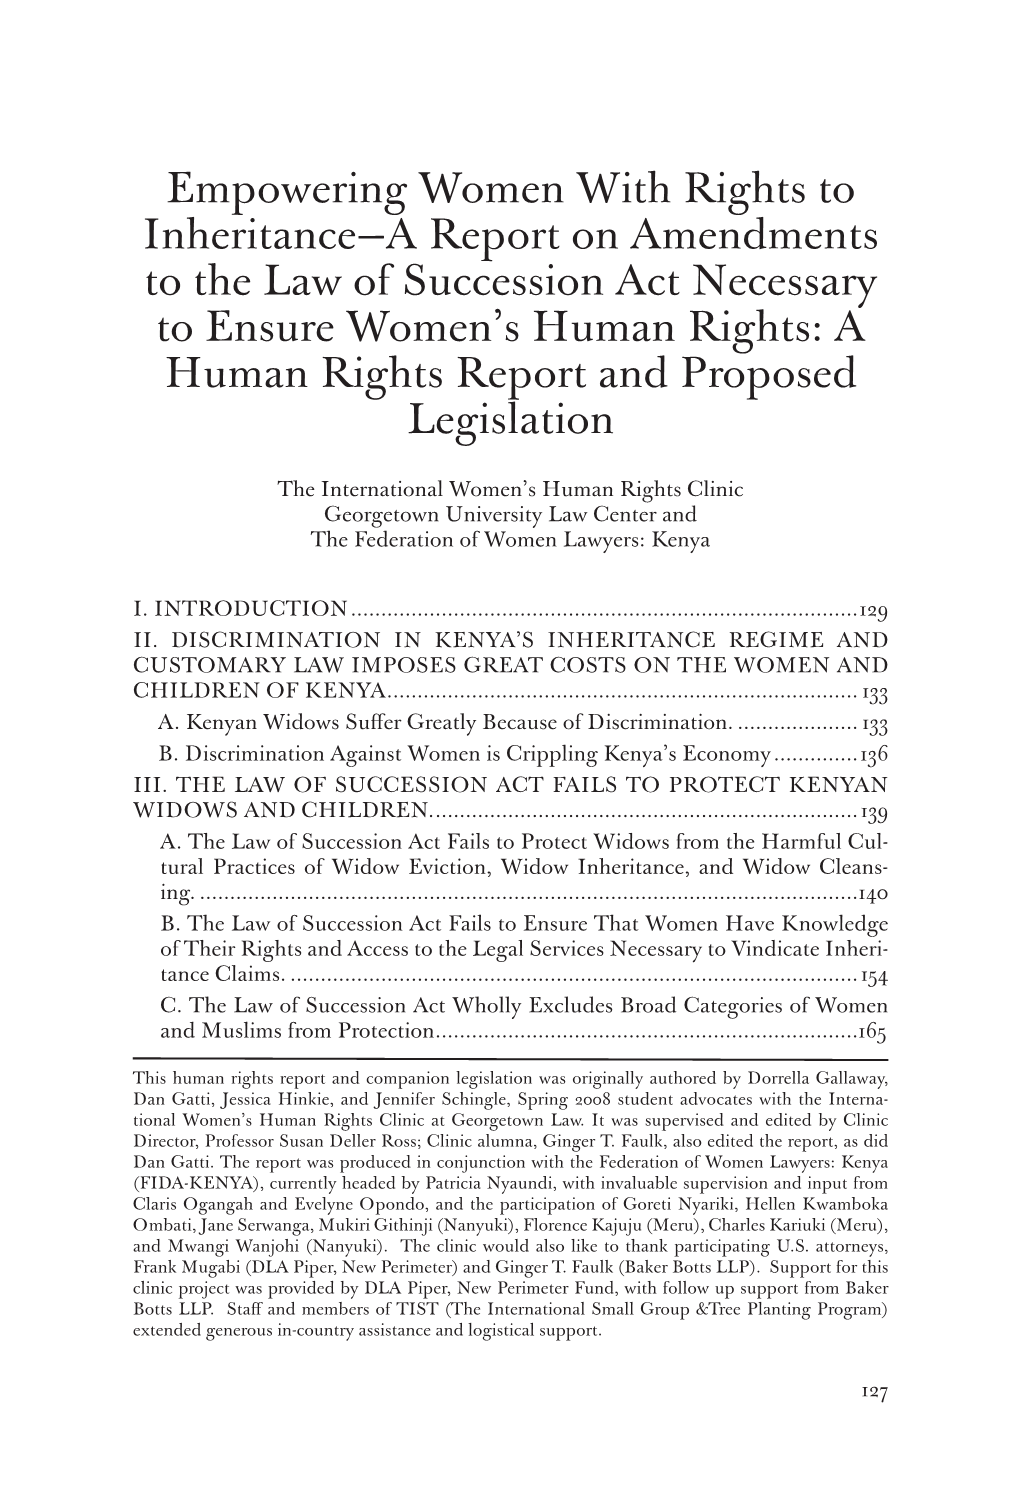 A Report on Amendments to the Law of Succession Act Necessary to Ensure Women’S Human Rights: a Human Rights Report and Proposed Legislation